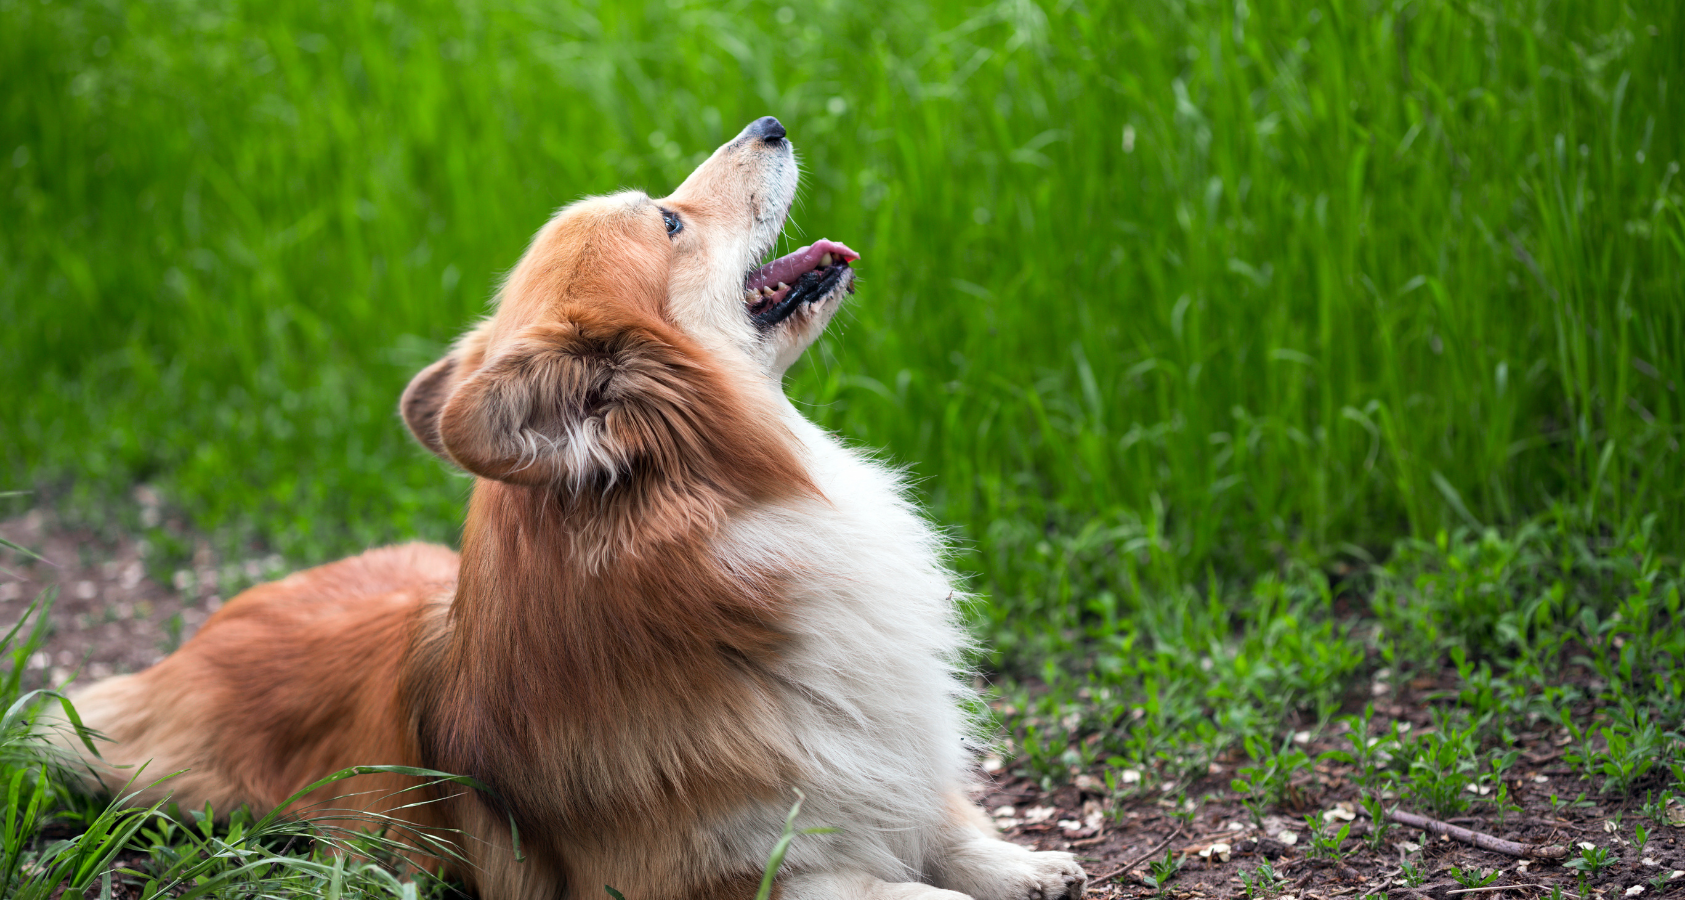 How To Groom Your Fluffy Corgi At Home? - 6 Things You Should Know